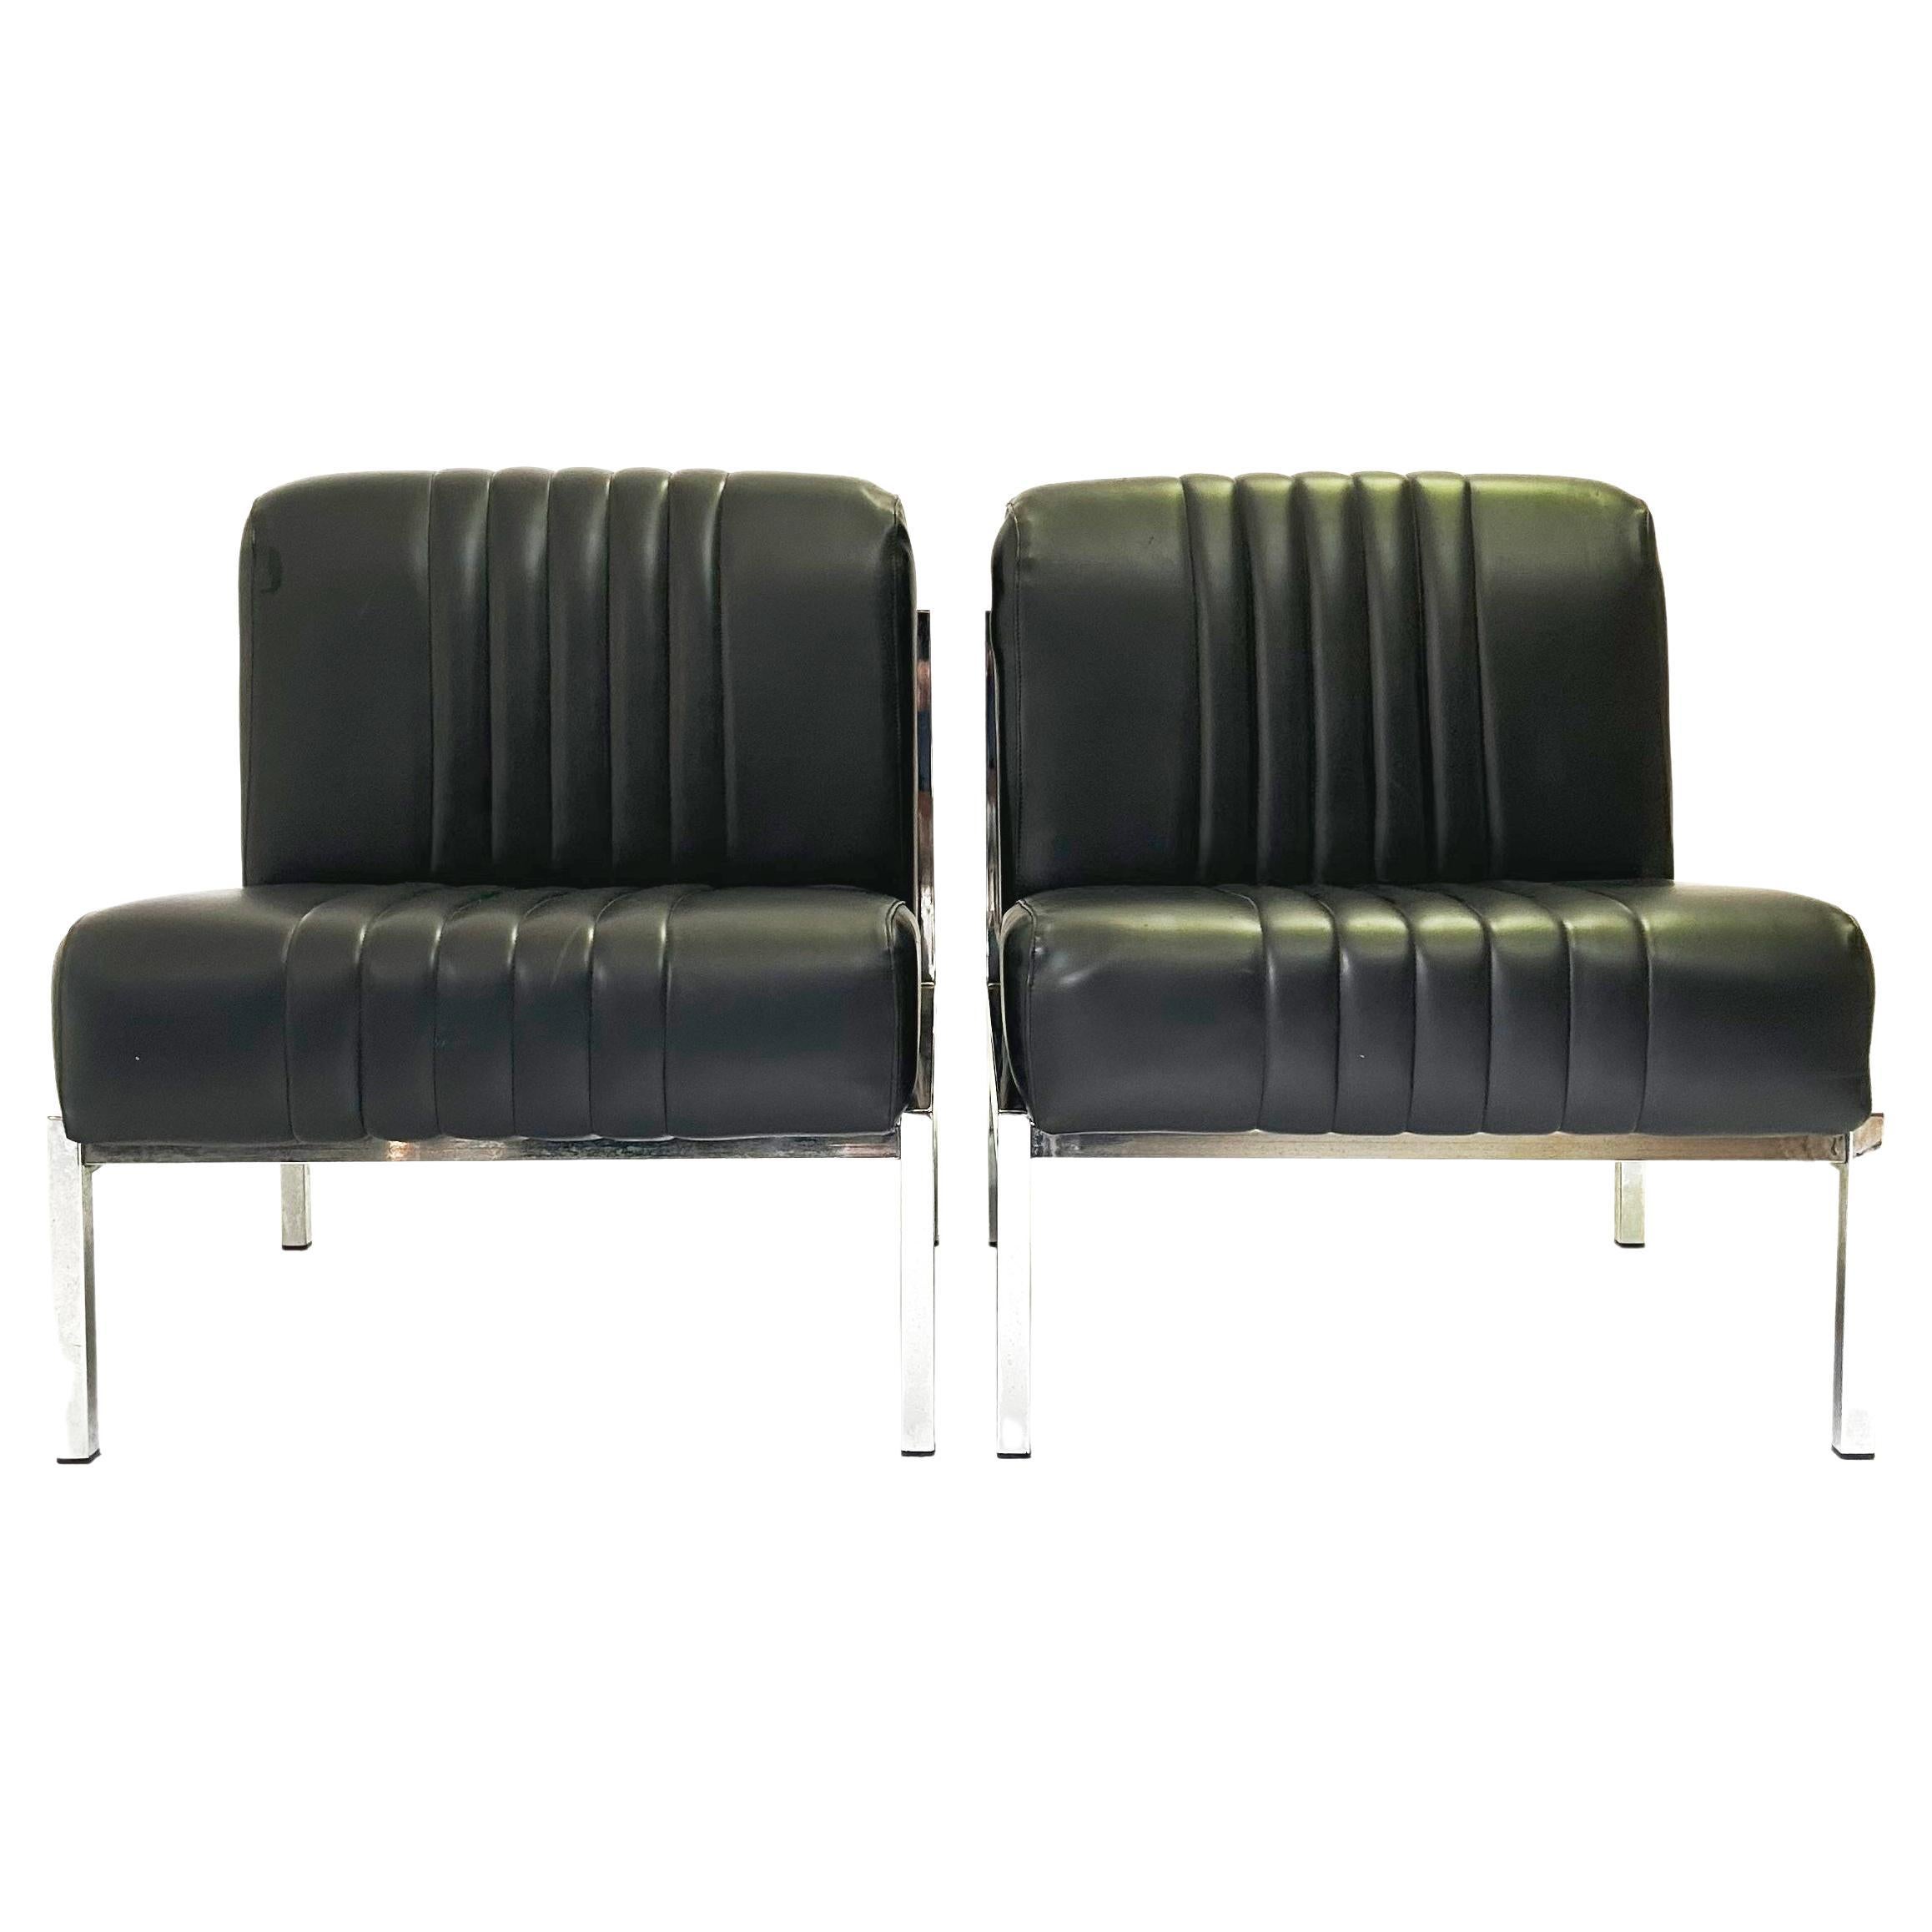 Beautiful pair of vintage black faux leather low chairs from the 1970s. In the style of the low seats made for Orly Paris Airport in the 1970s.